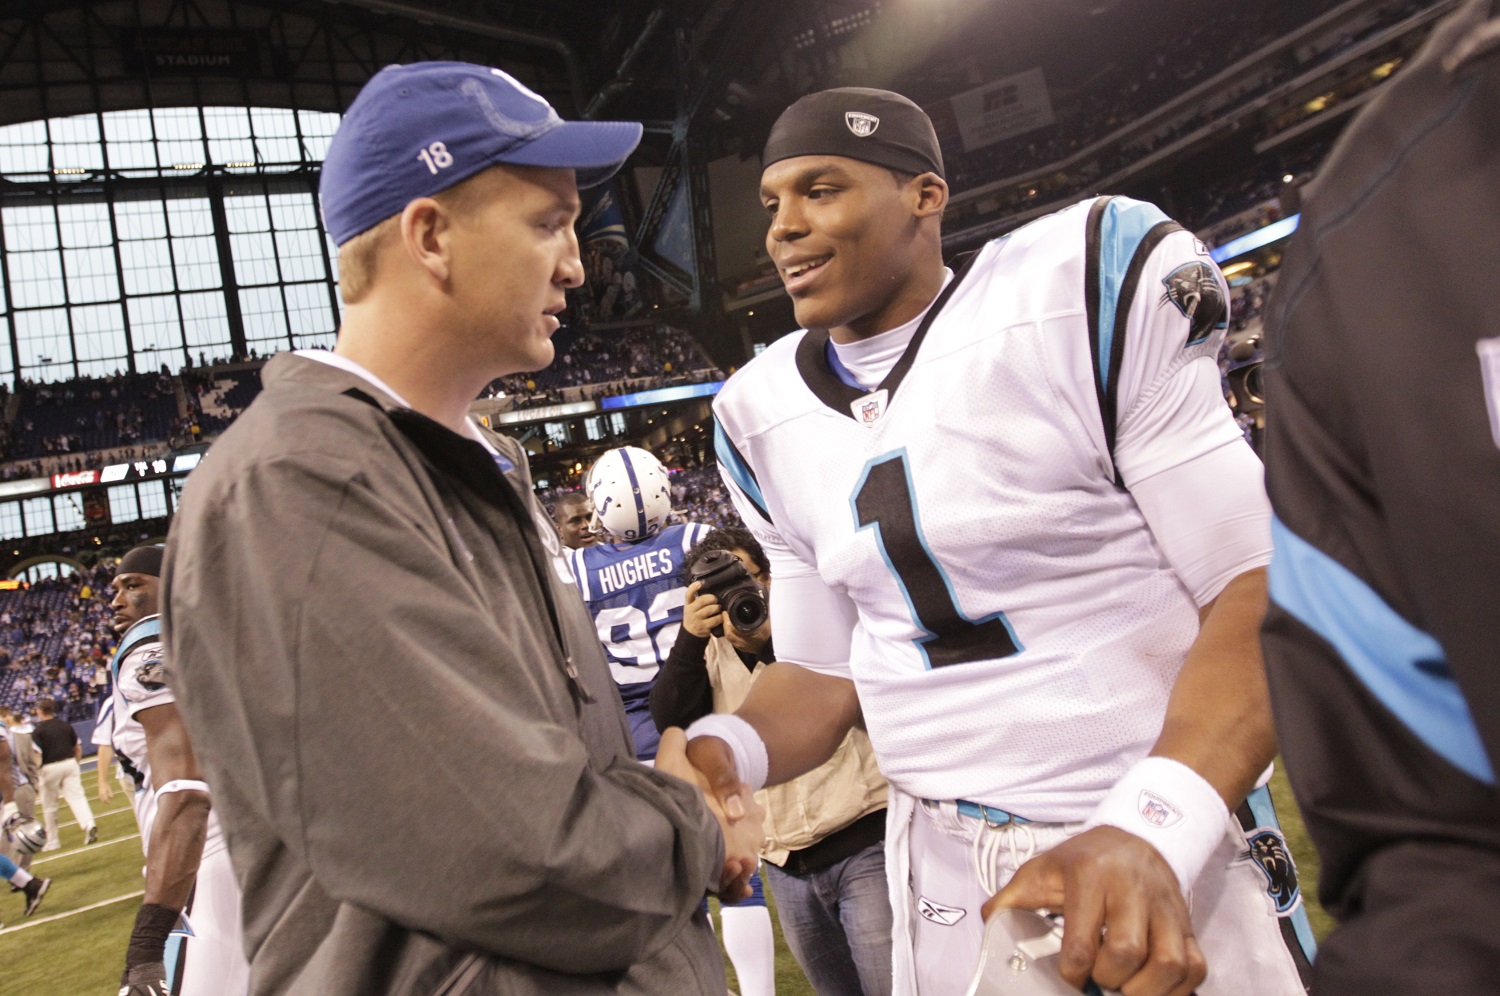 FILE - In this Nov. 27, 2011, file photo, injured Indianapolis Colts quarterback Peyton Manning meets with Carolina Panthers quarterback Cam Newton after an NFL football game in Indianapolis. For the next two weeks, until Peyton Manning's AFC champion Denver Broncos face Cam Newton's NFC champion Carolina Panthers in the 50th Super Bowl in Santa Clara, California, most of the focus will be on the two quarterbacks who were No. 1 overall draft picks 13 years apart. (AP Photo/AJ Mast, File)